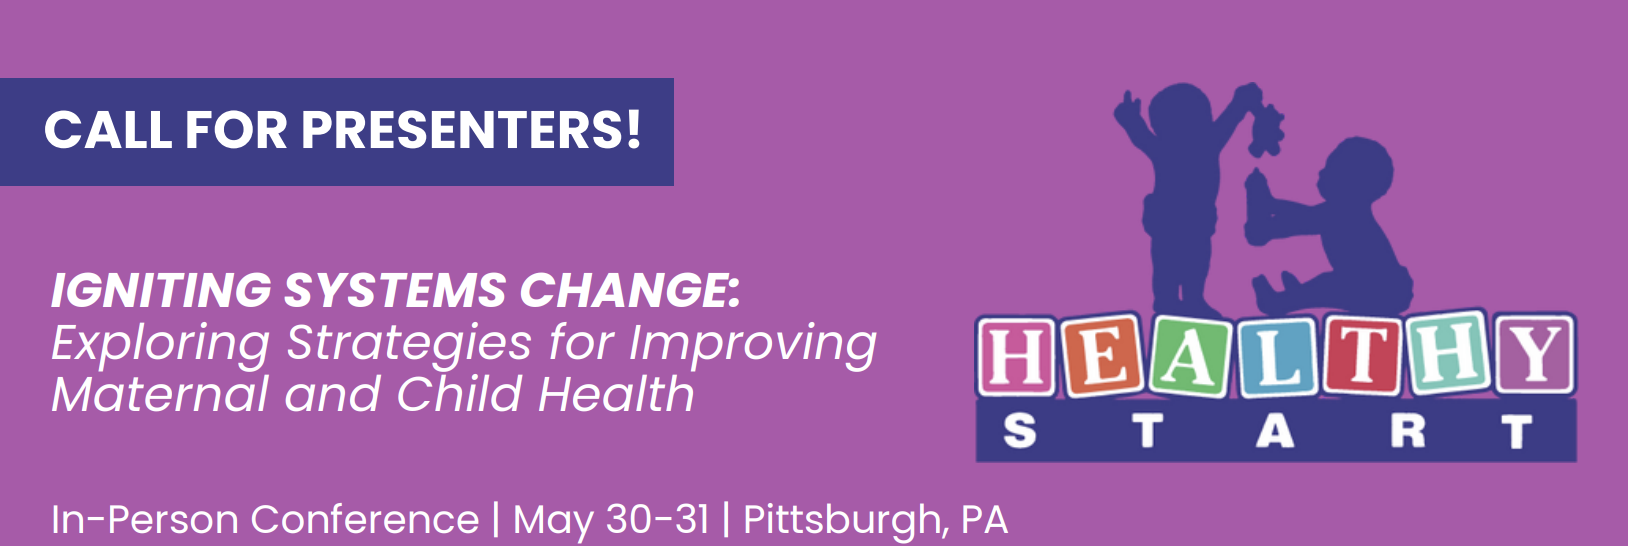 Igniting Systems Change: Exploring Strategies for Improving Maternal and Child Health Conference